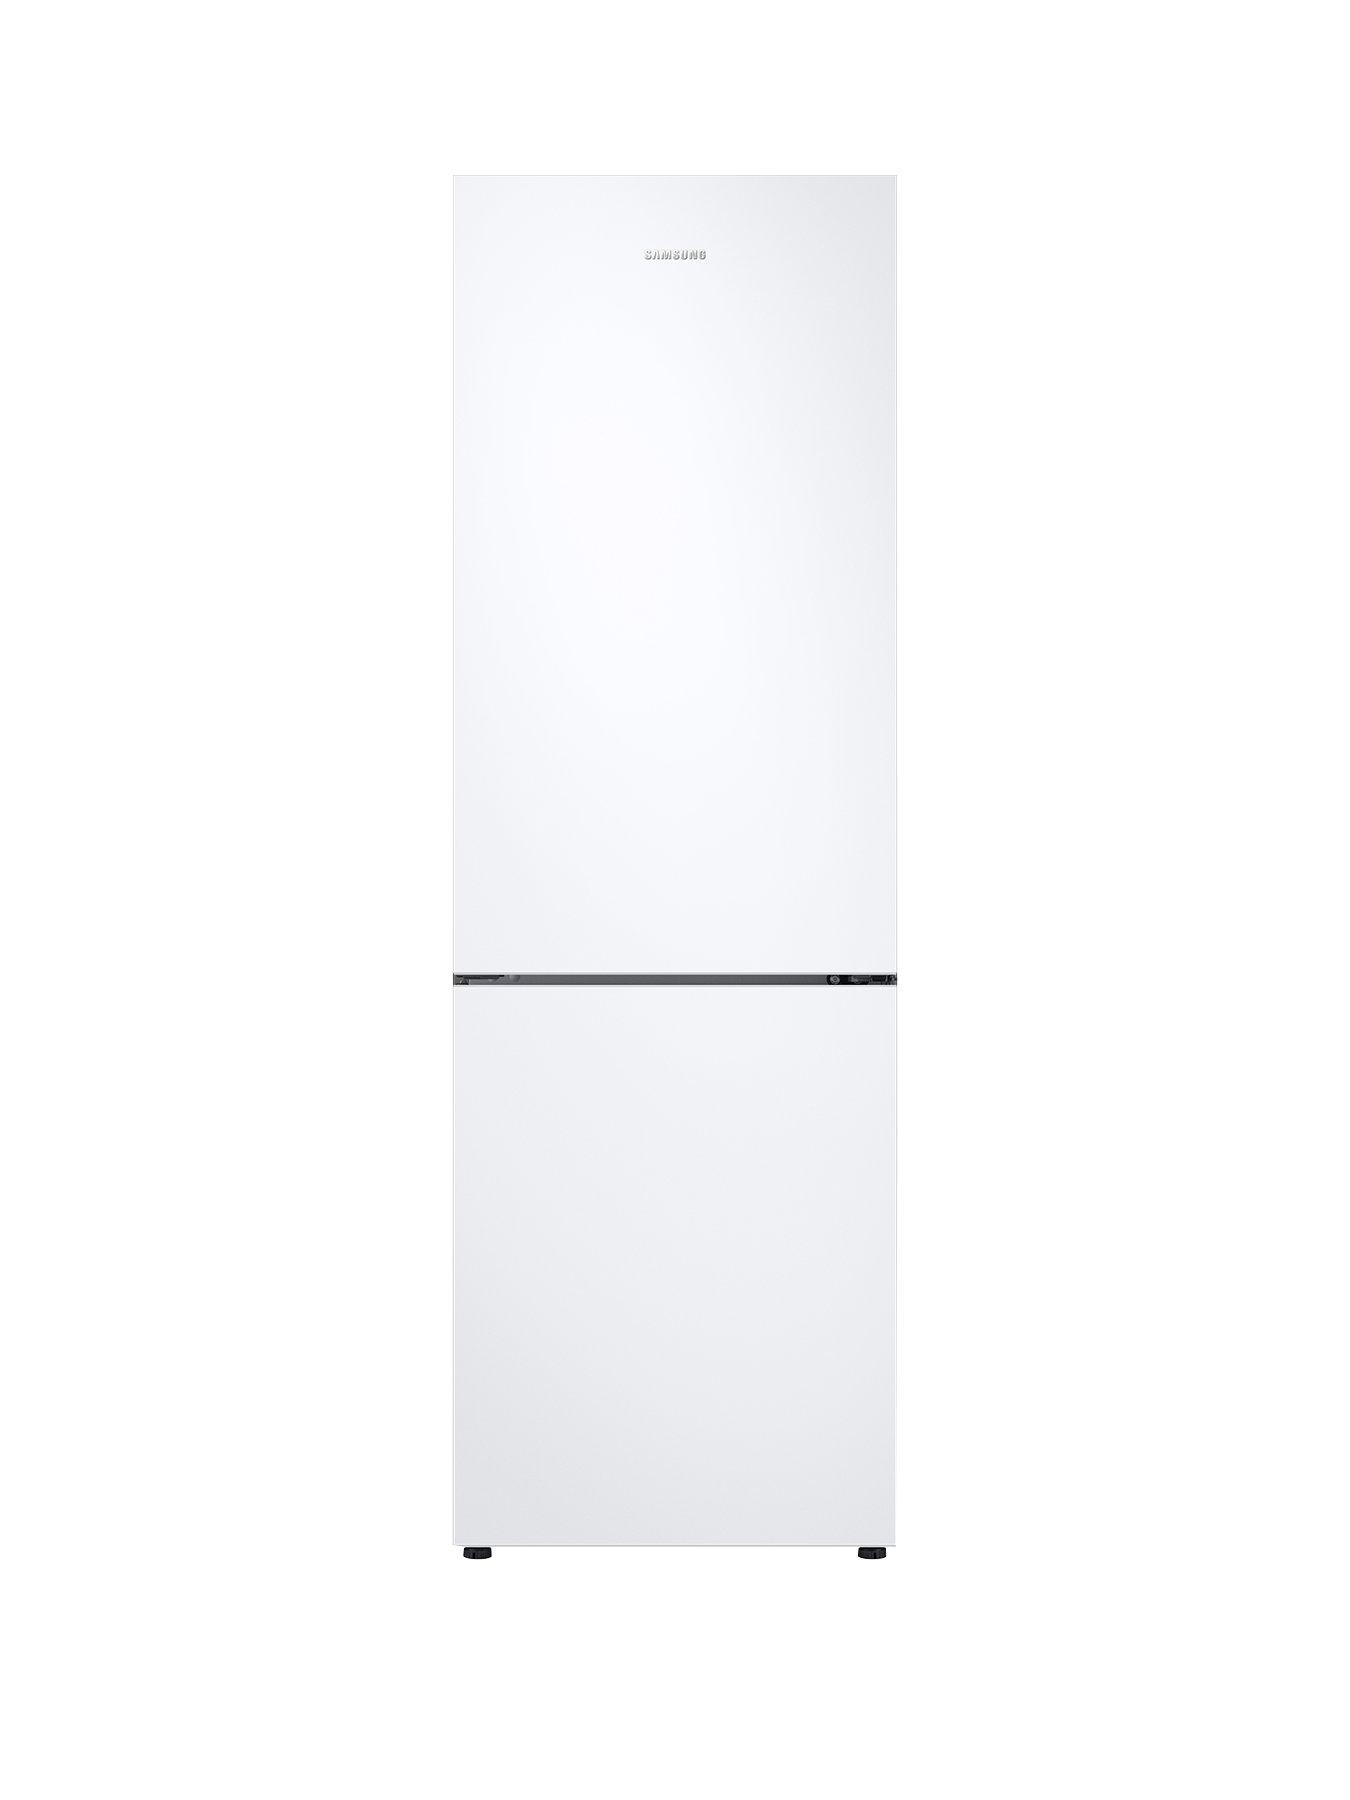 Samsung Rb33B610Eww/Eu Classic Fridge Freezer With Spacemax Technology - E Rated - White